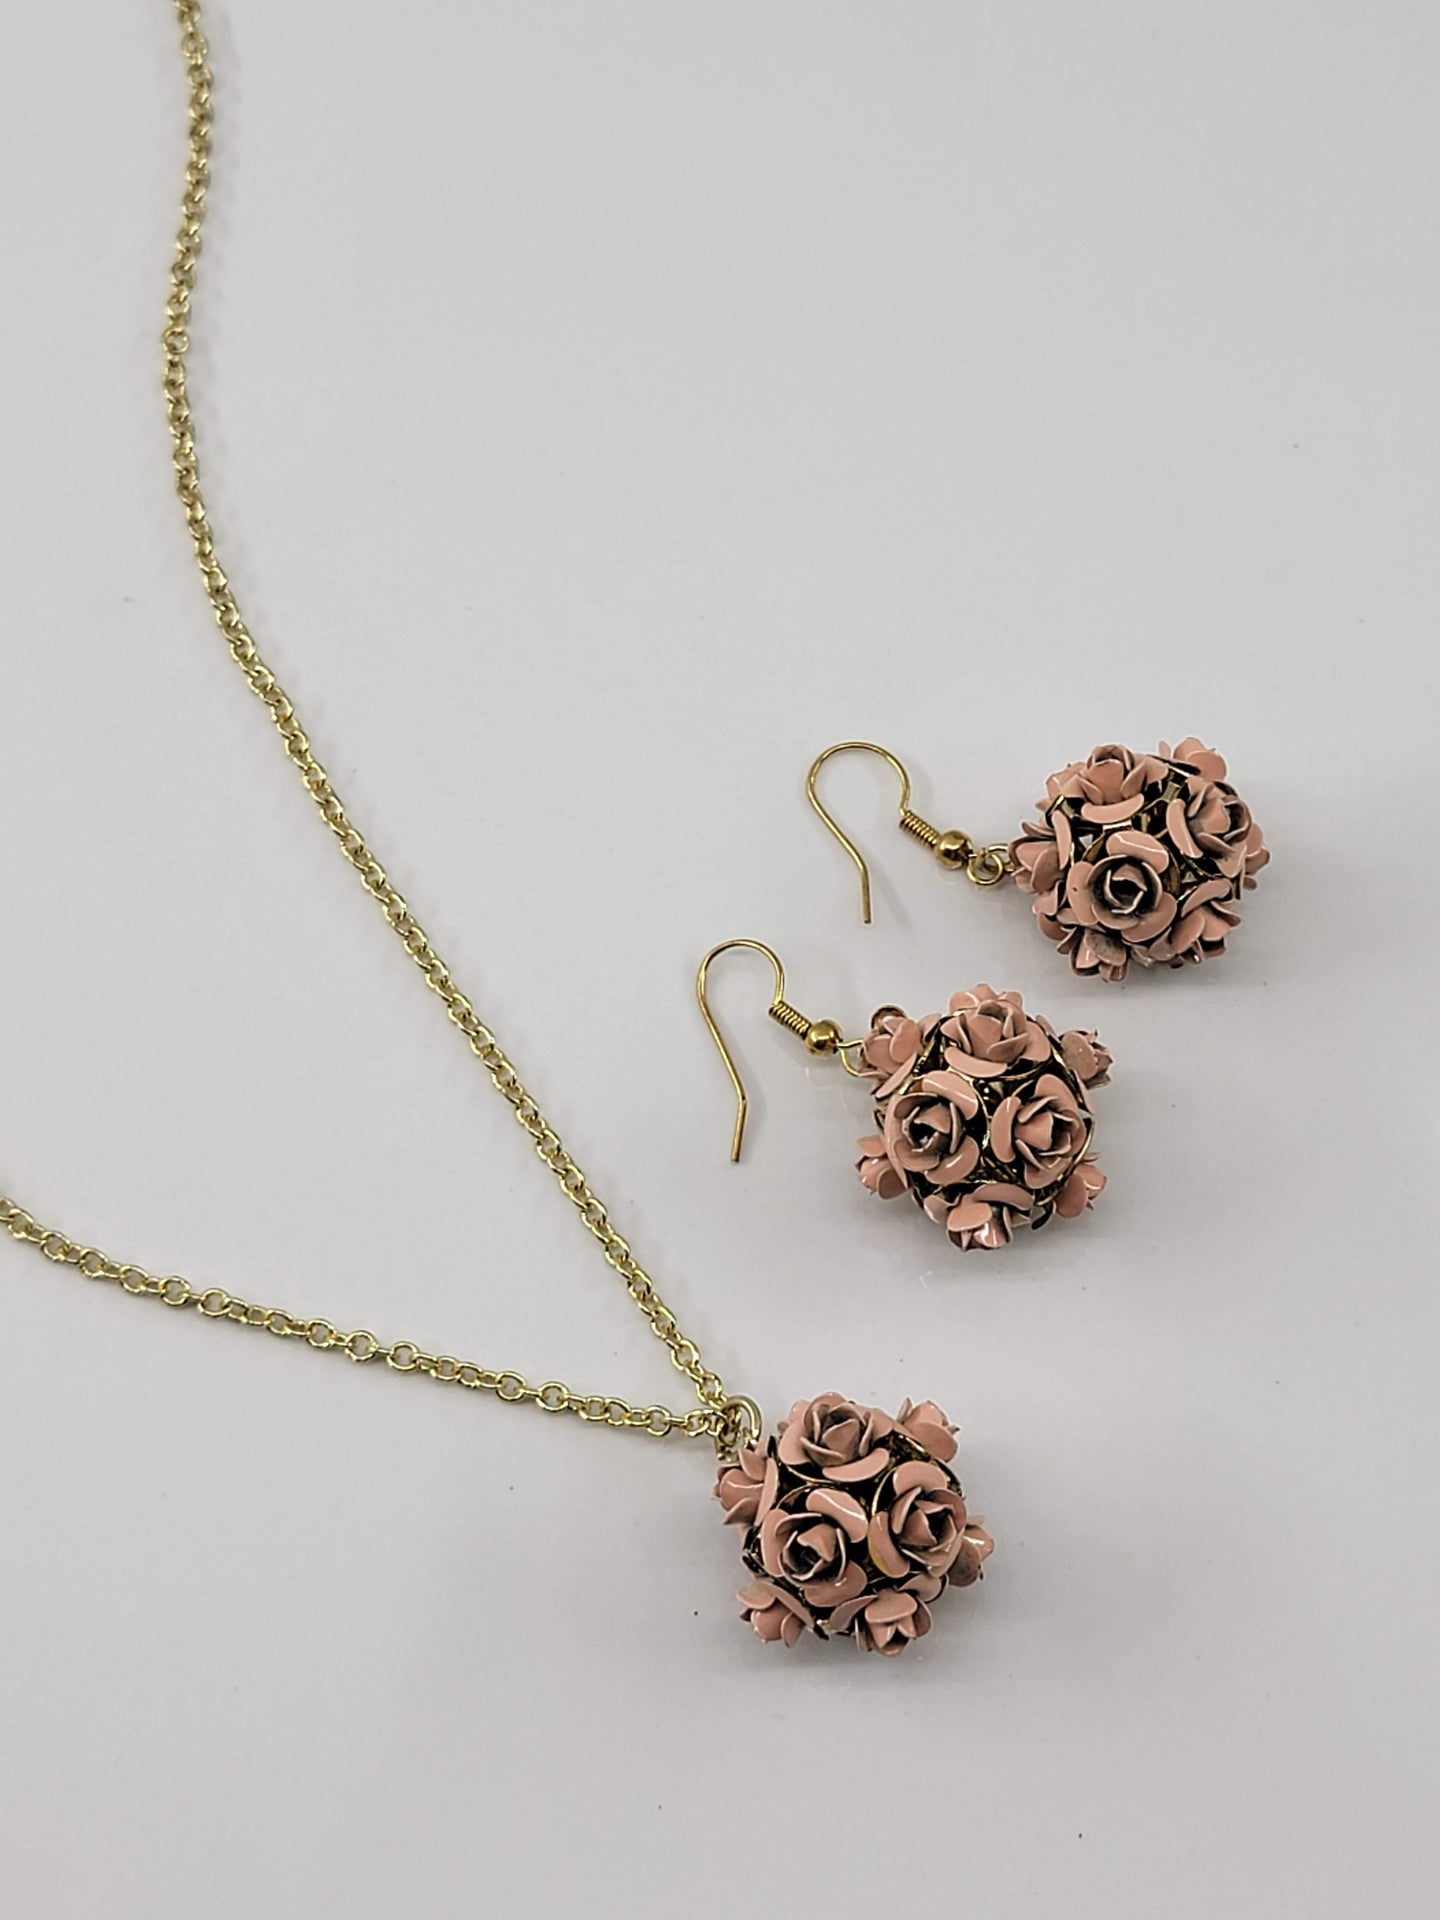 Pink Rose Jewelry Set - Matching Necklace & Earrings